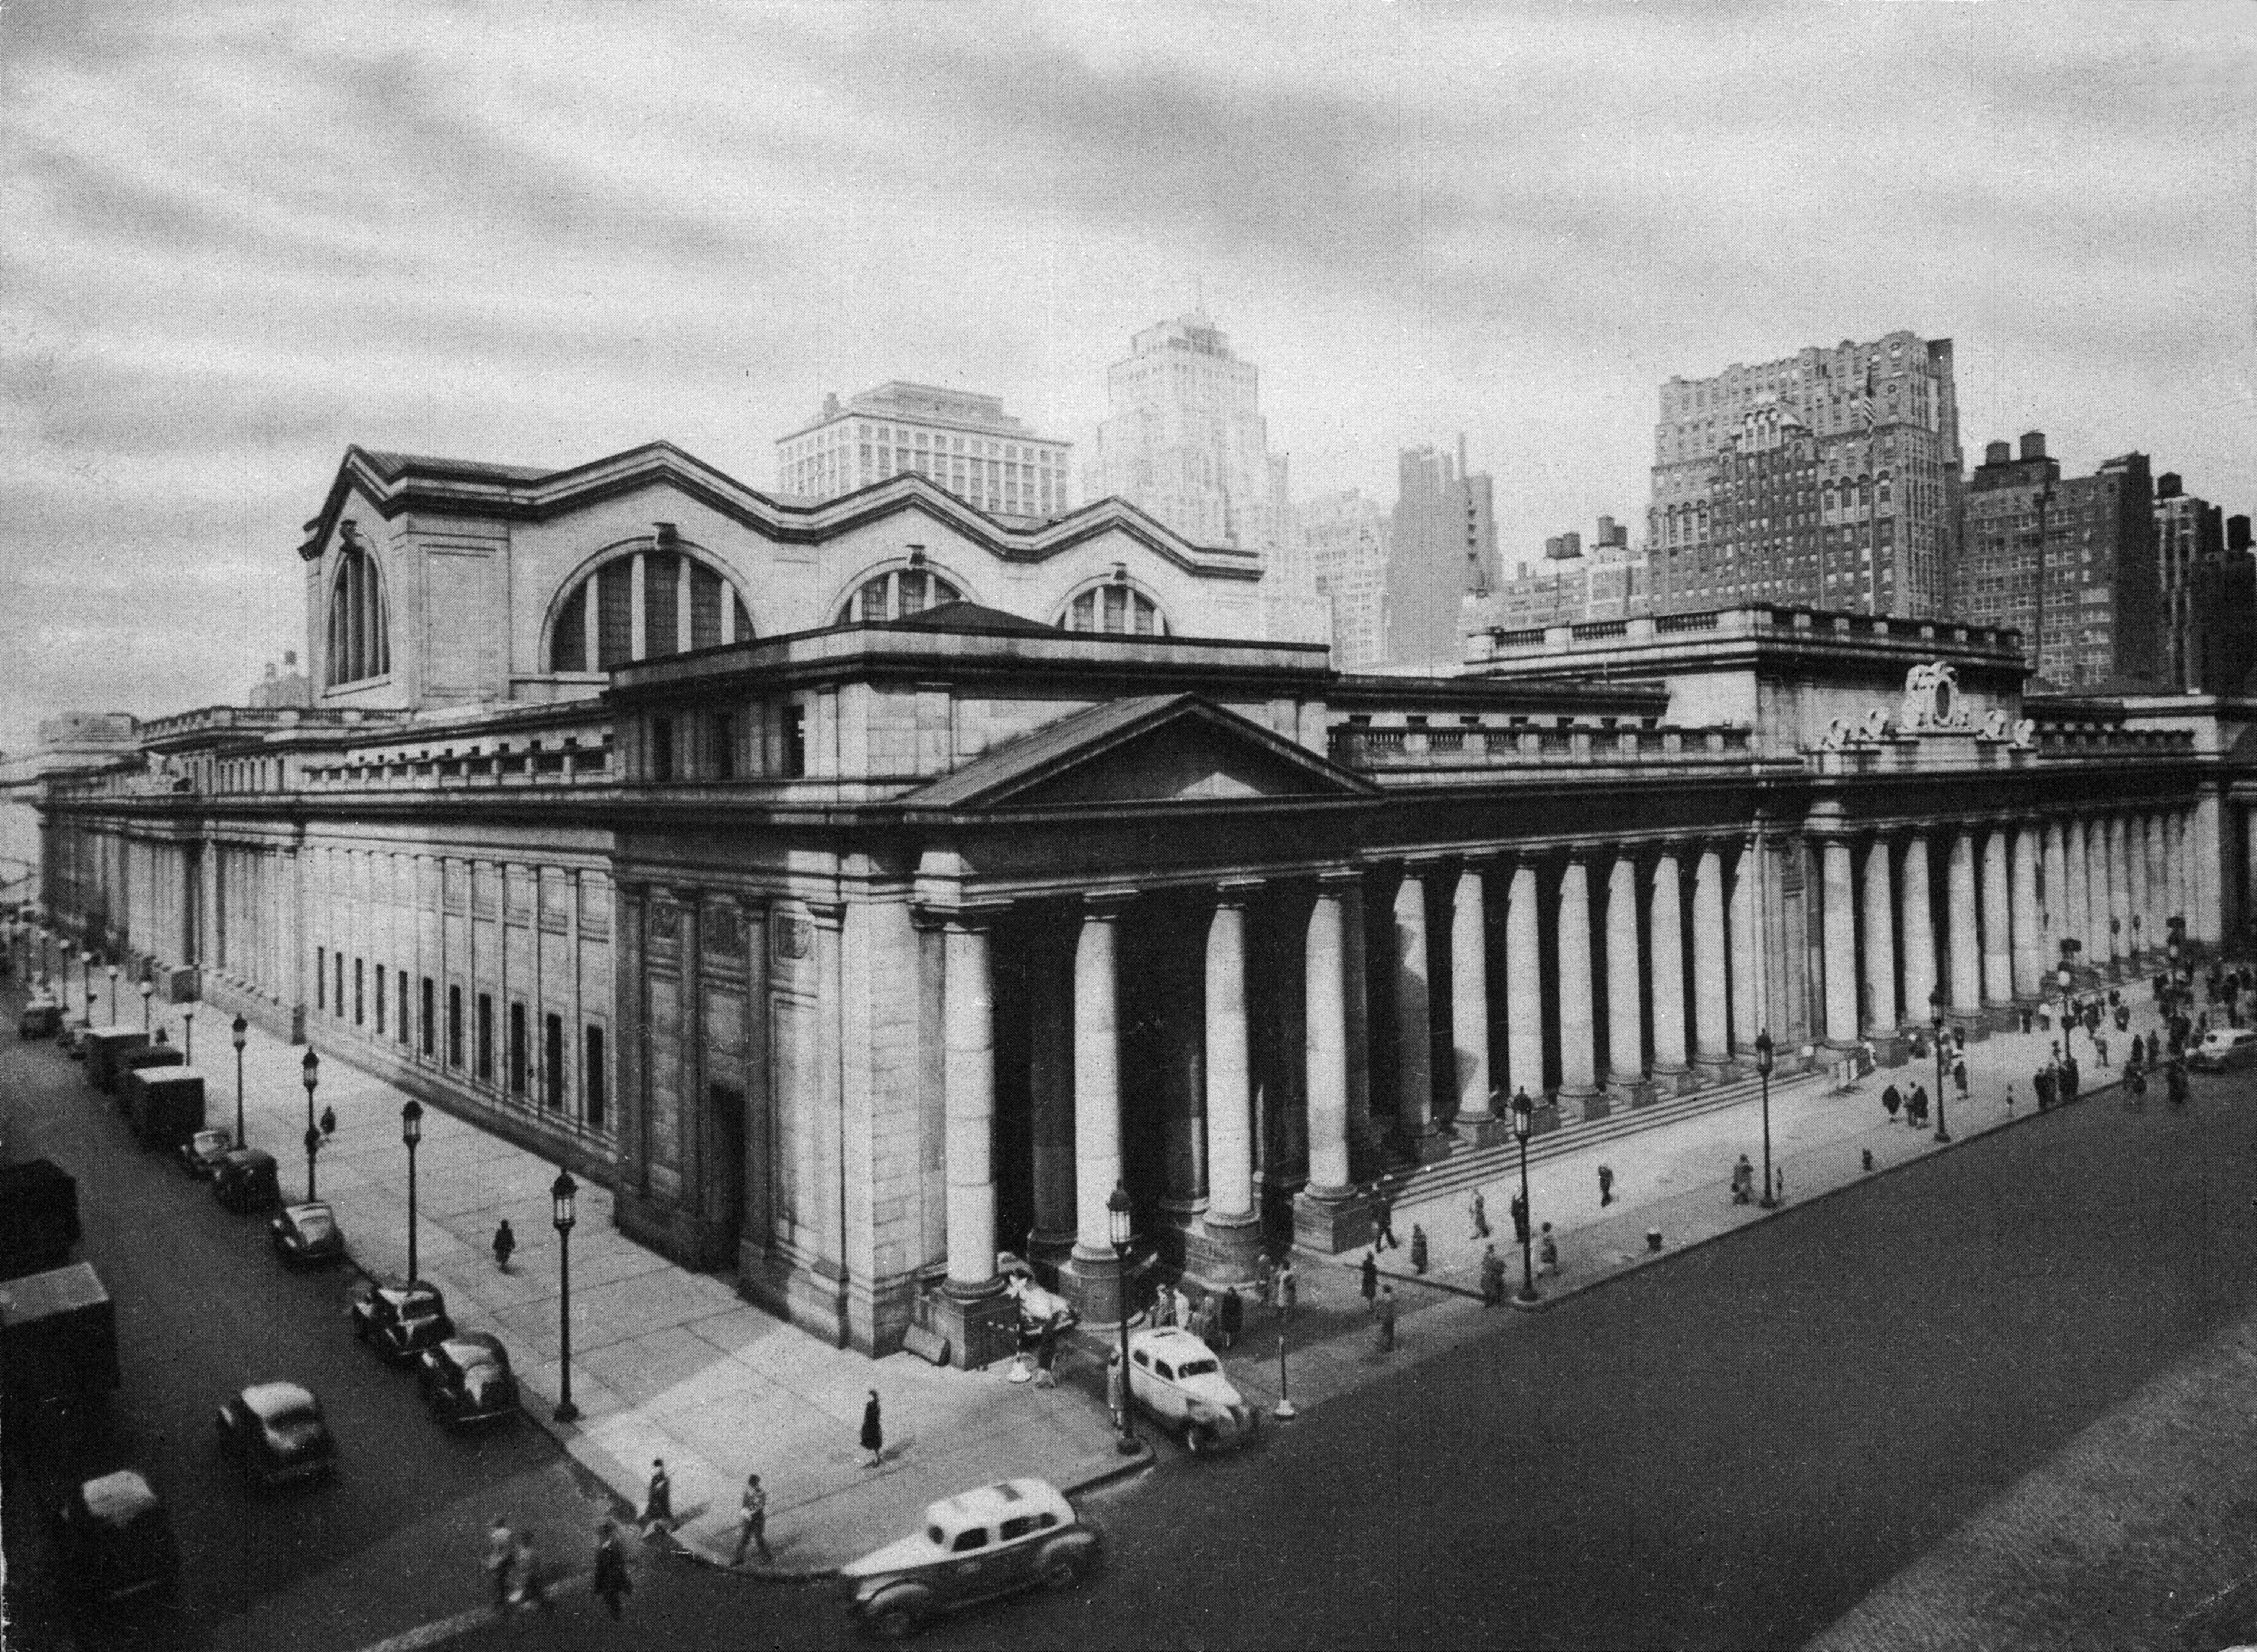 Pennsylvania Station in New York pictured from the corner of Seventh Avenue, circa 1940